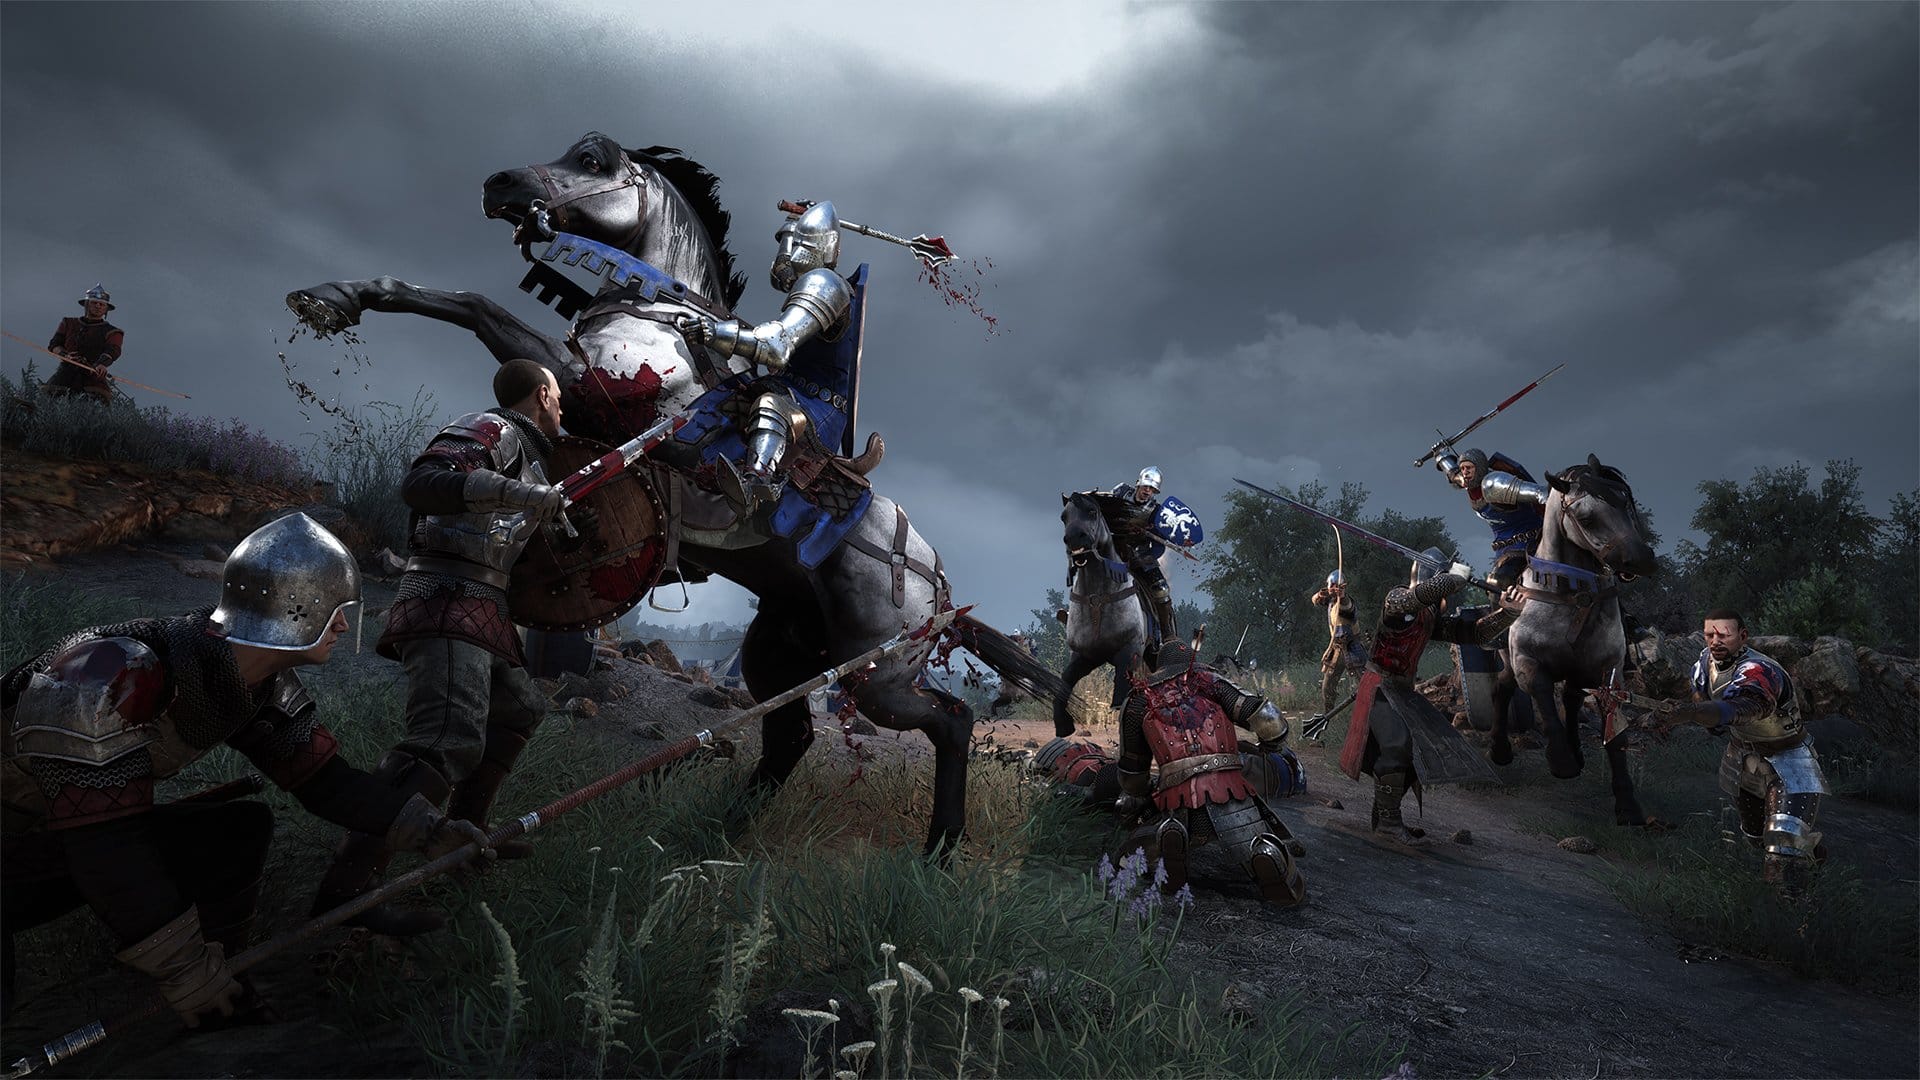 Screenshot from Chivalry 2 with a man on horseback surveying a battlefield